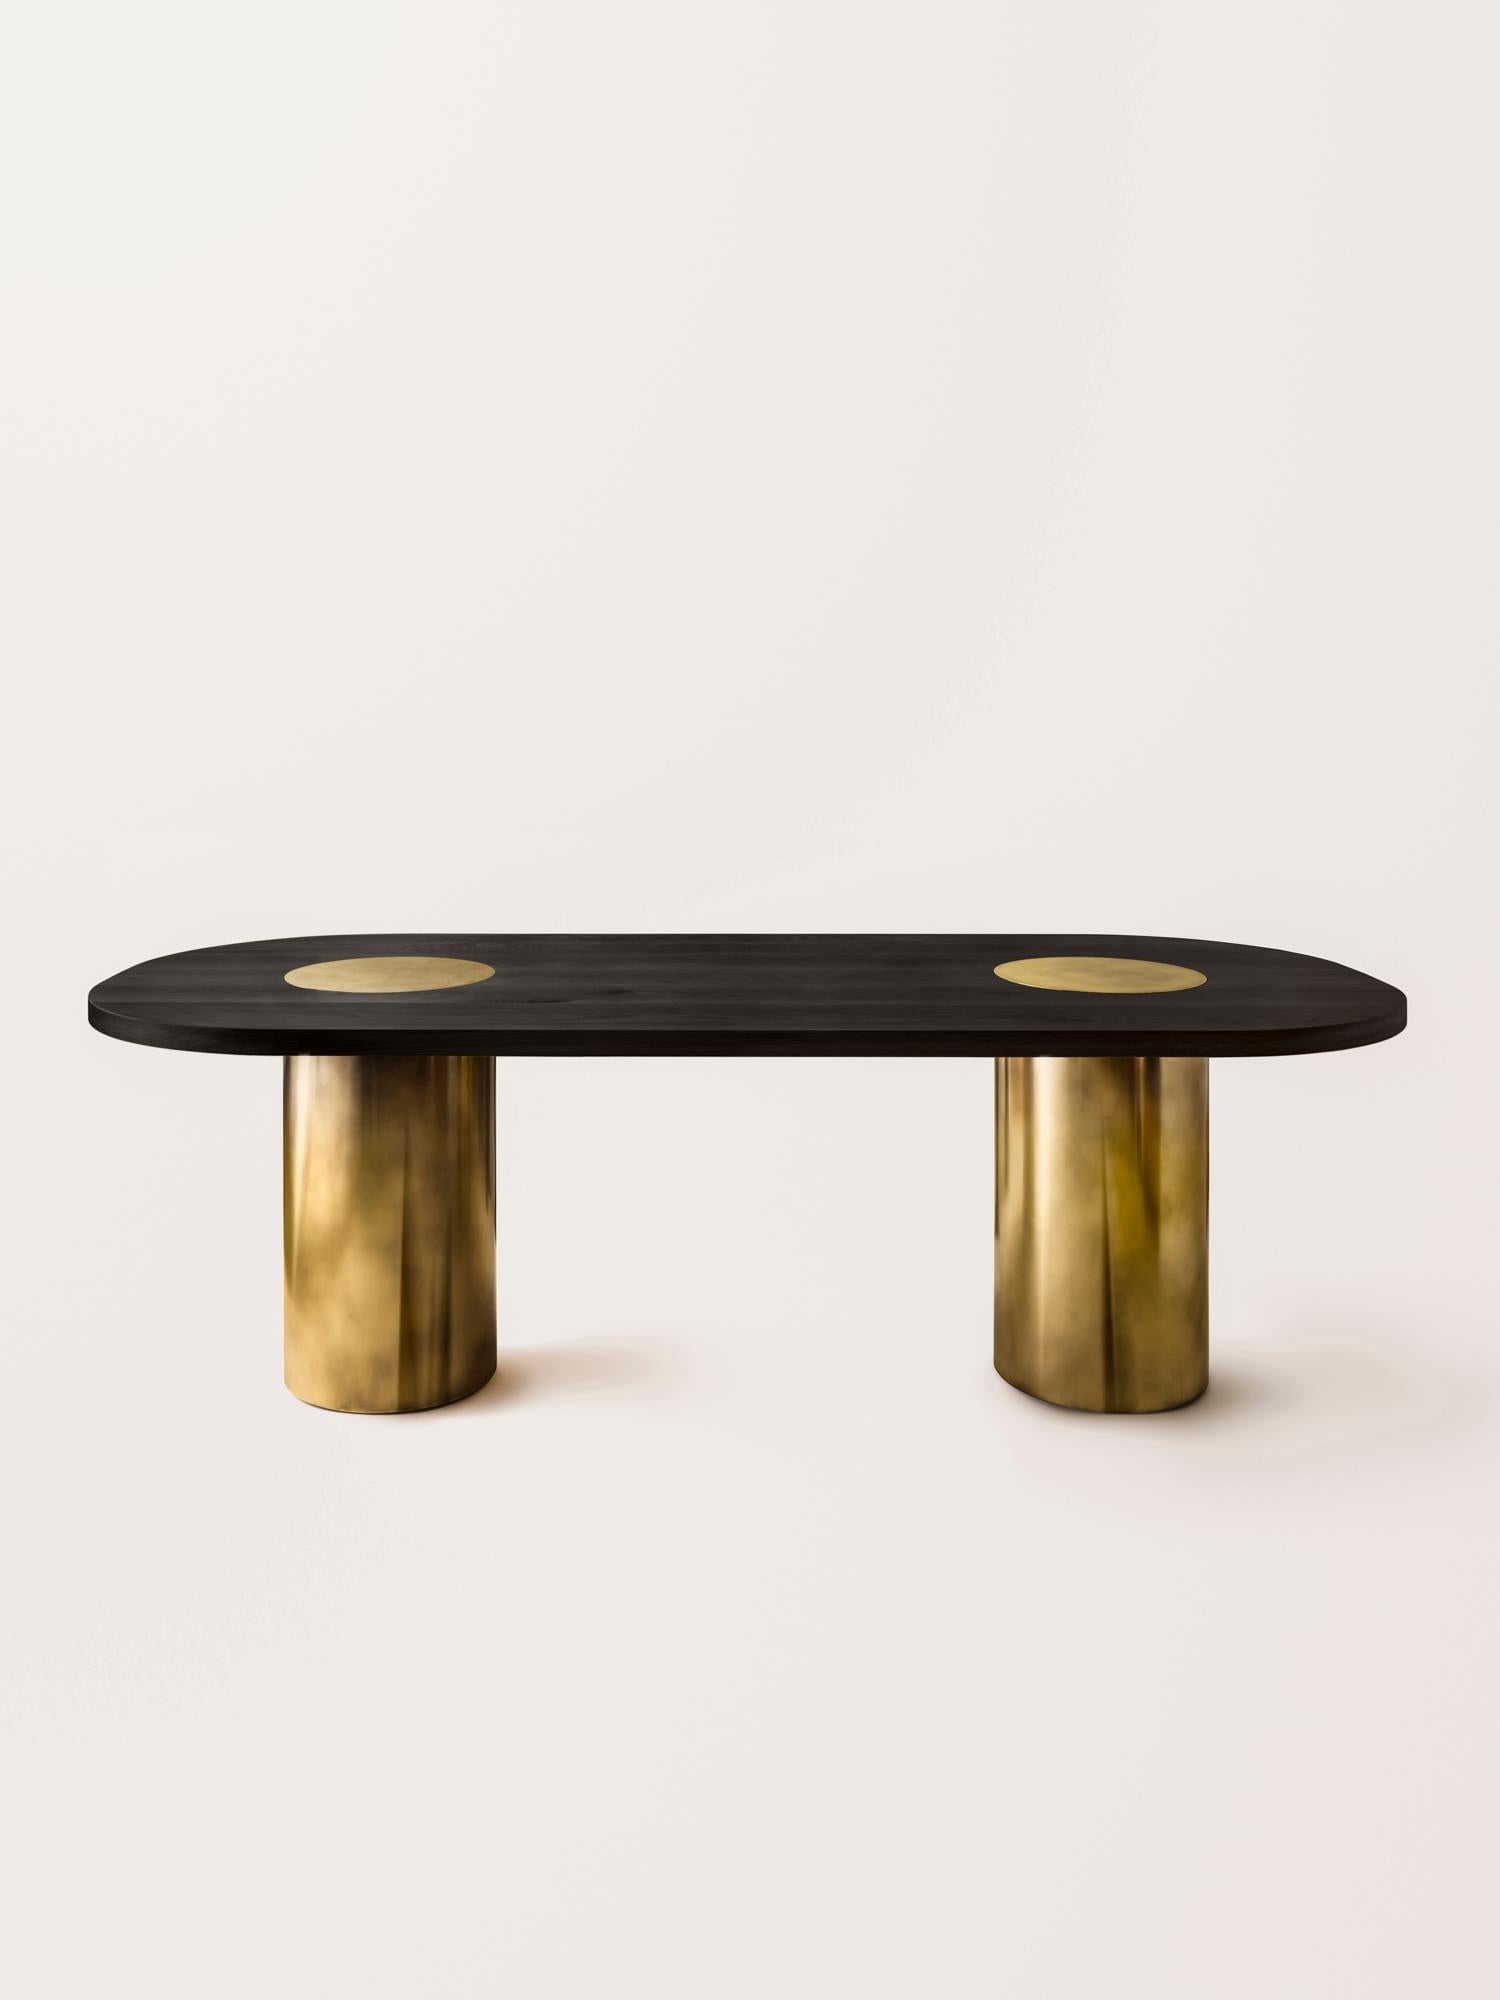 Inspired by the form and function of grain silos, the sculptural Silo Dining Table features solid wood and hand-finished brass or stainless steel wrapped legs.

This listing does NOT include the two brass domes that are pictured in some images, they